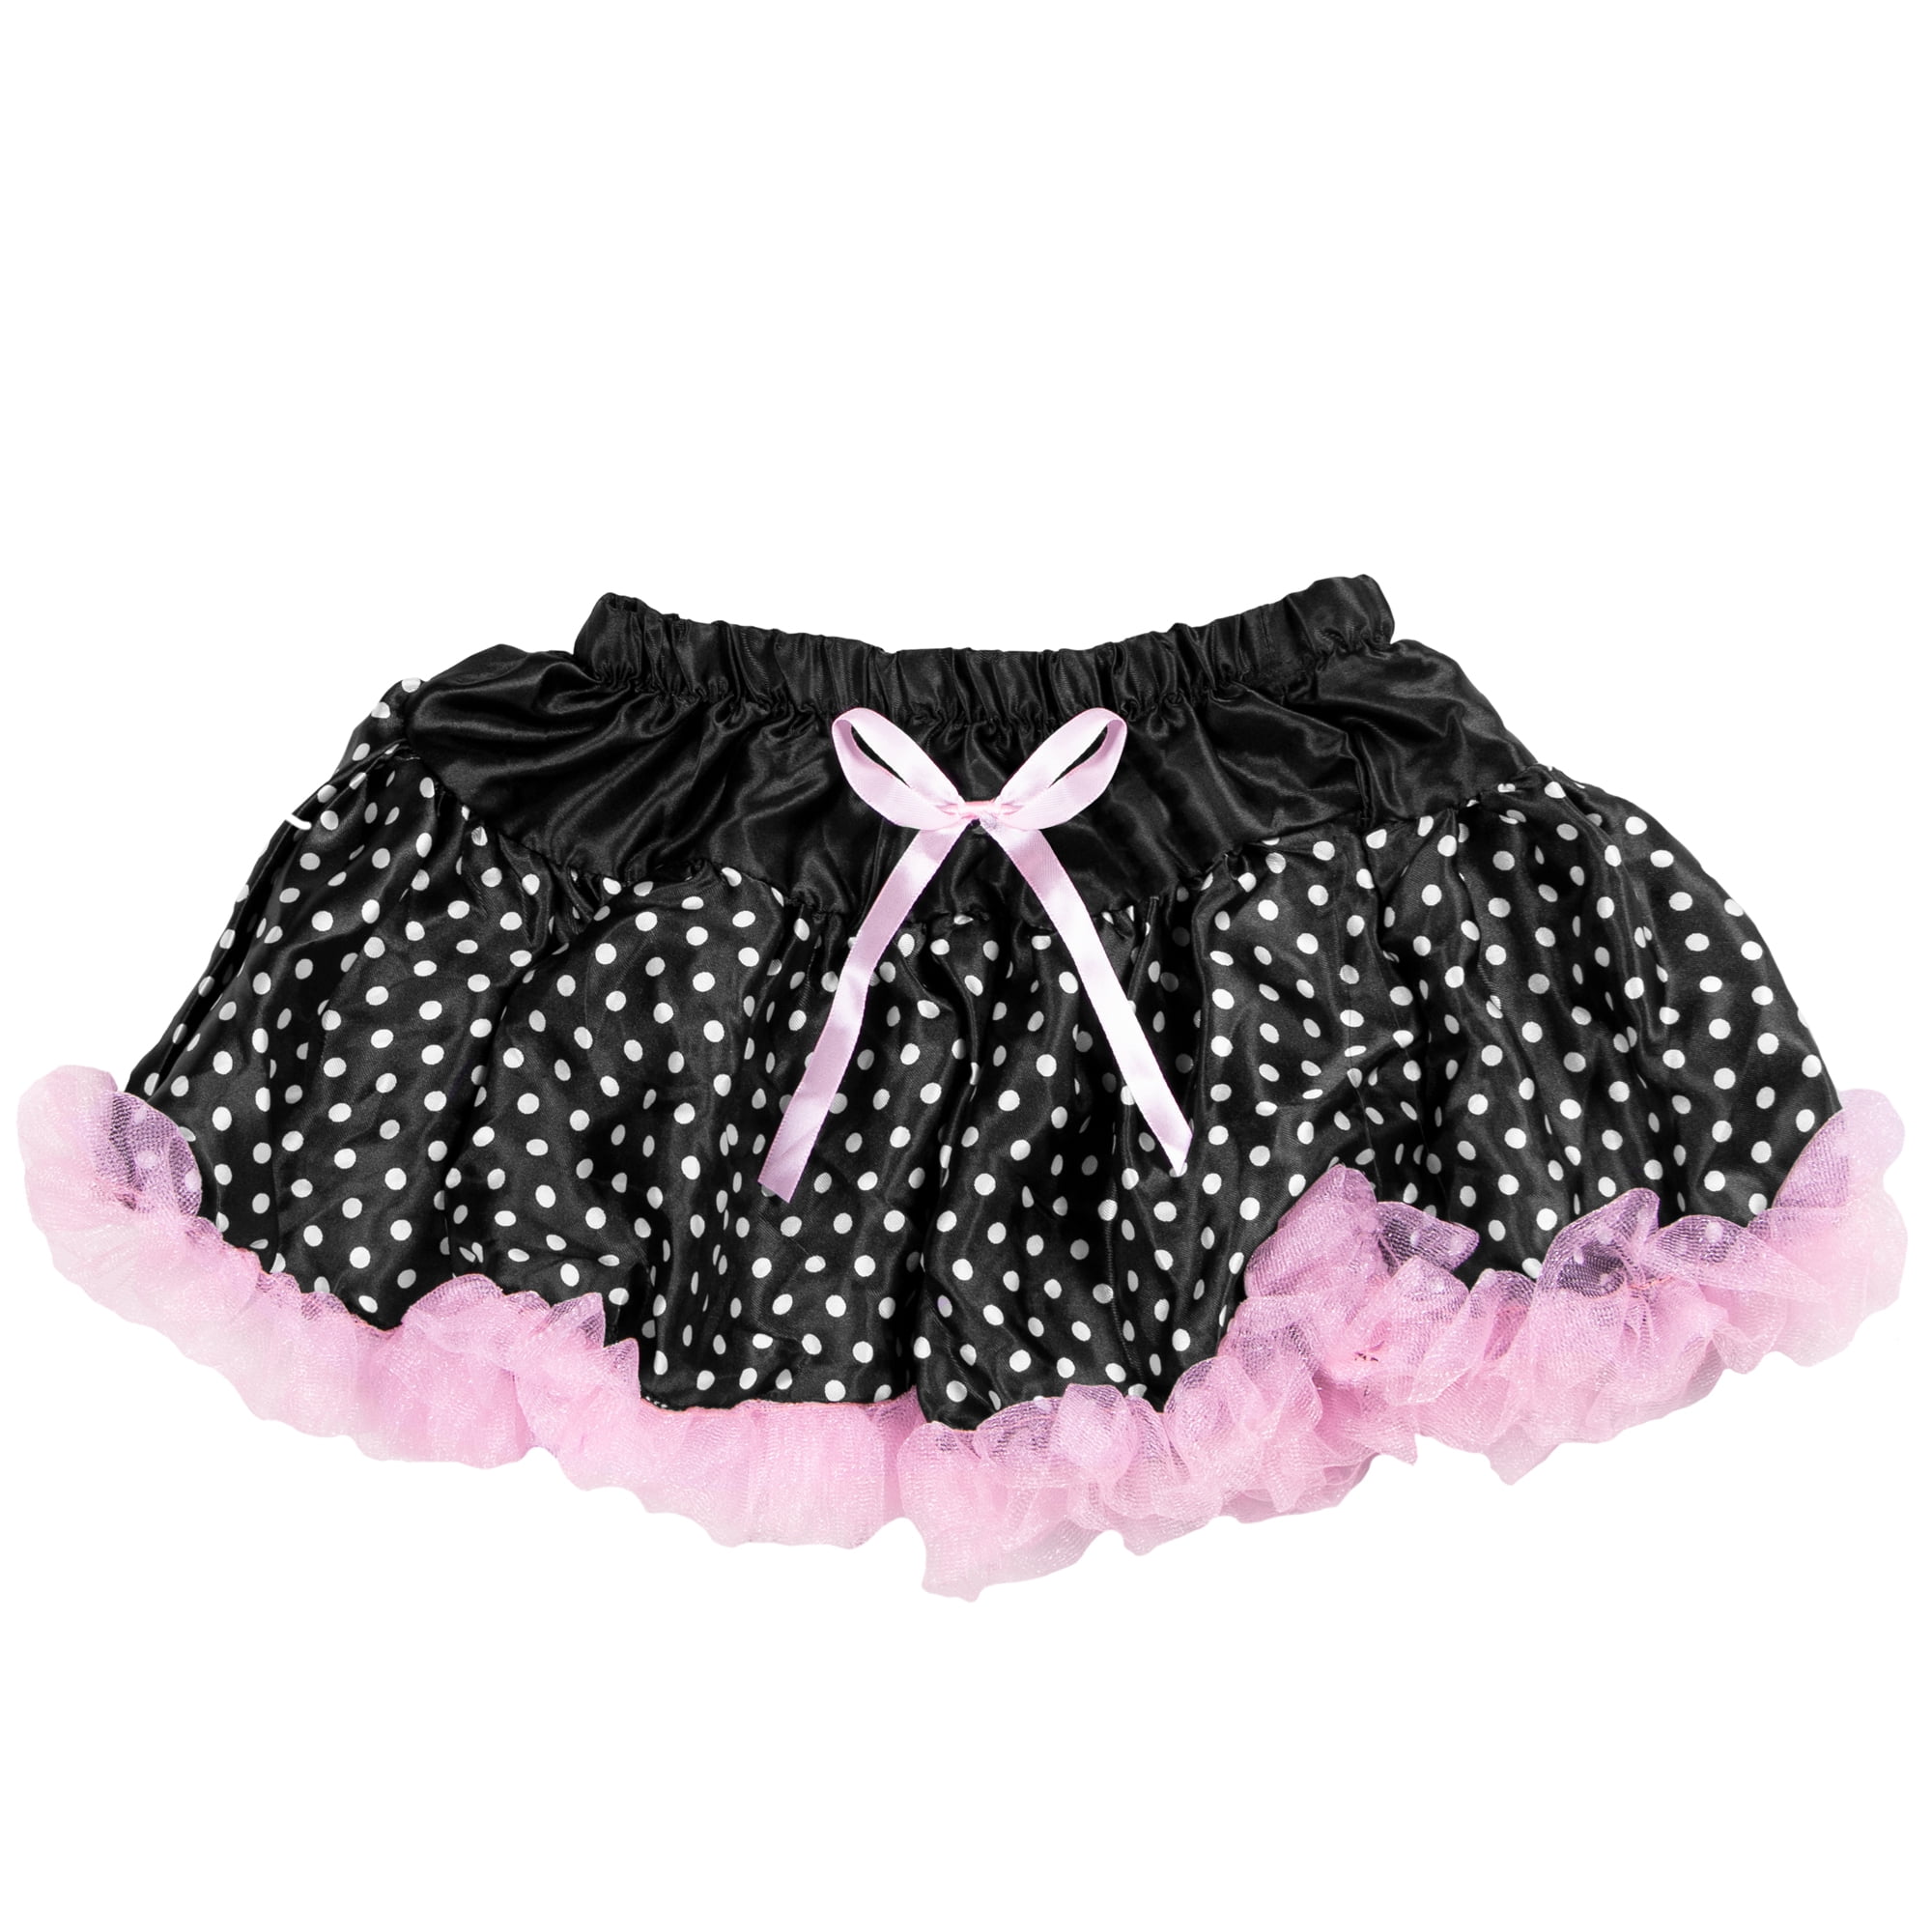 Picture of Brybelly MCOS-504 Black Polka Dot Costume Tutu